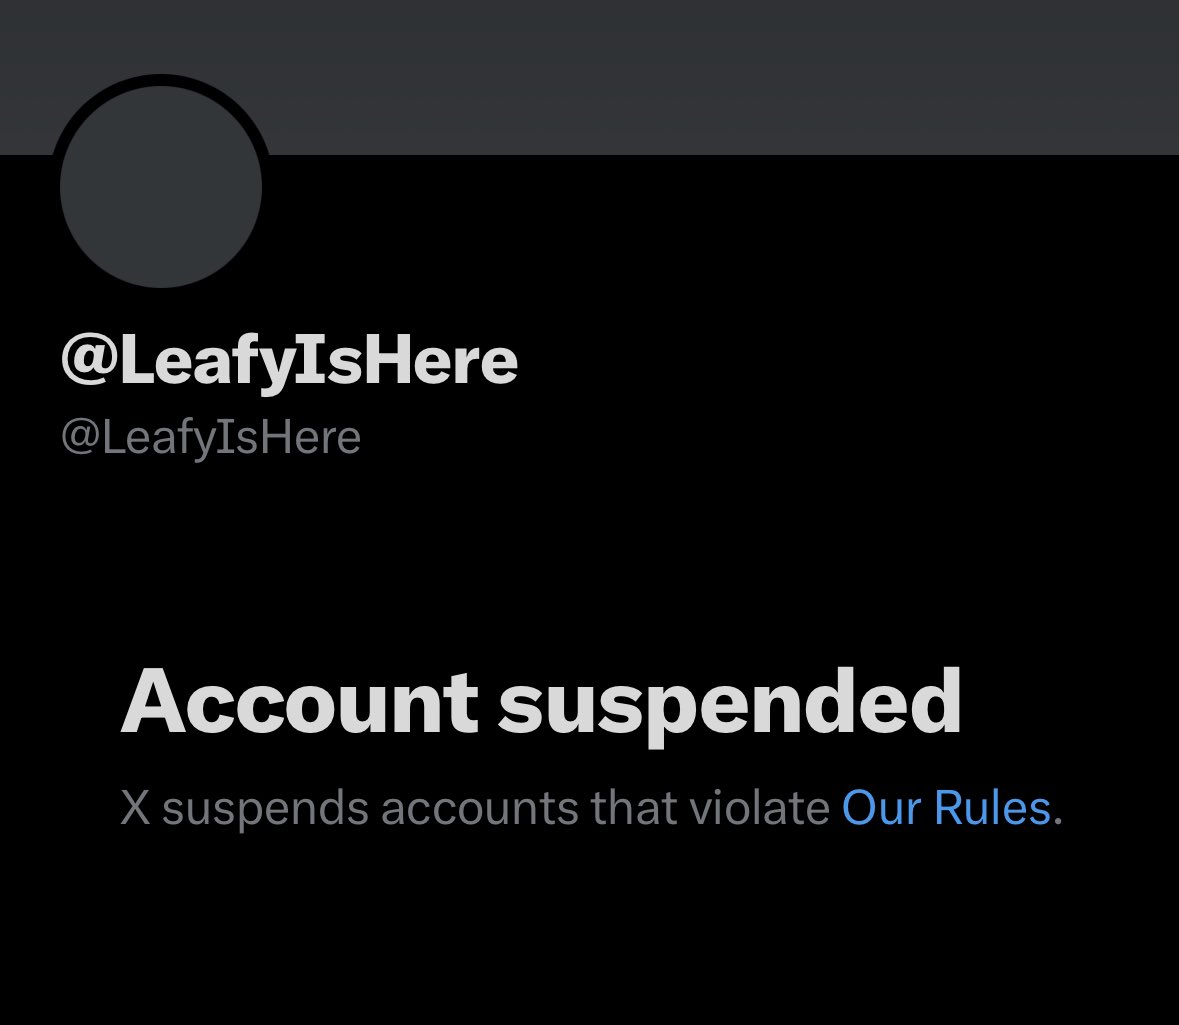 Hey Elon Musk @elonmusk , why is Leafy still suspended? Did he break a law? That’s the only basis for suspensions according to you. Thanks #FreeLeafy @Support